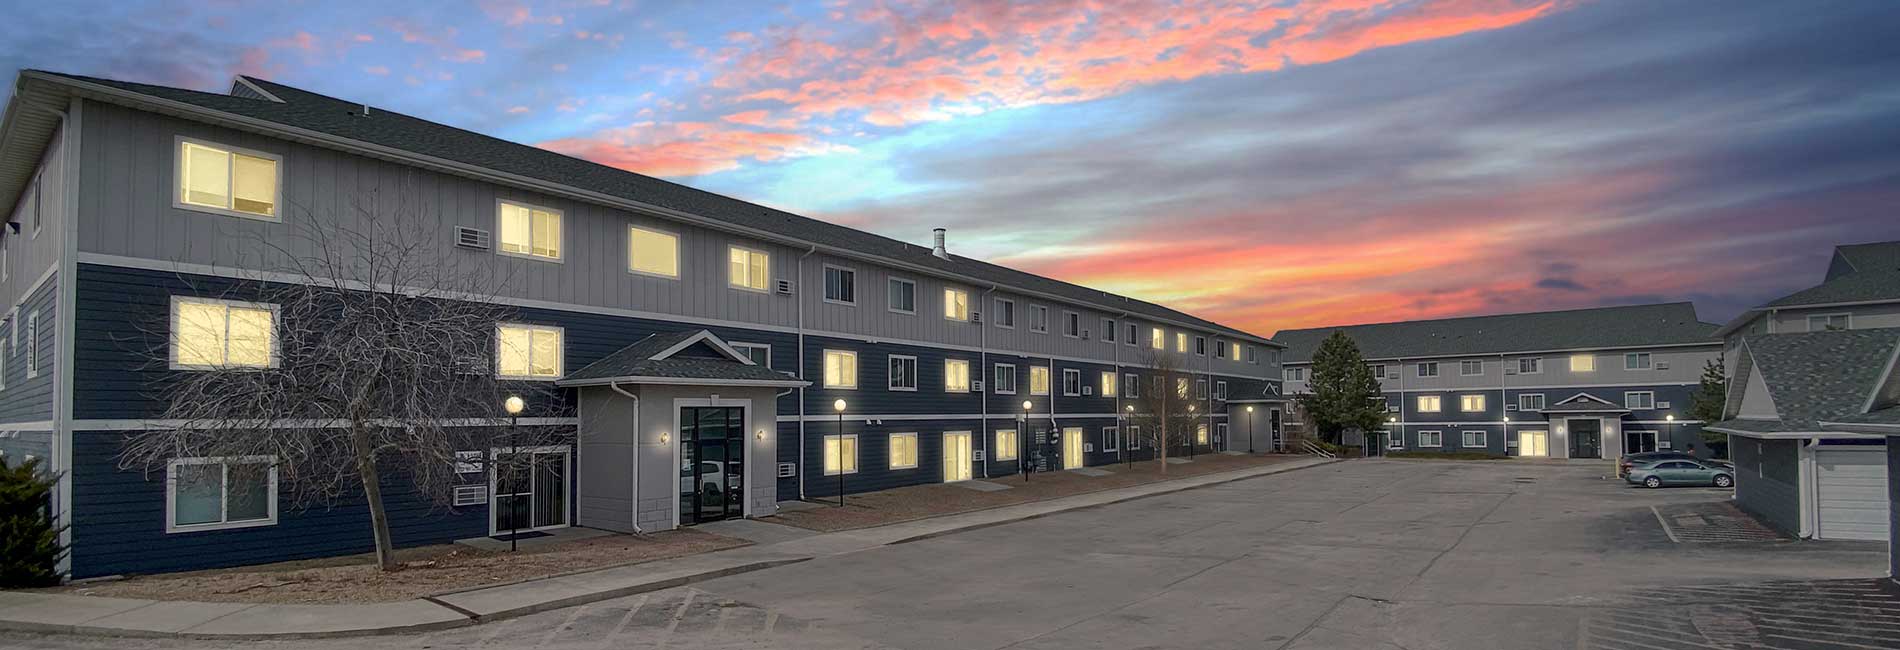 1 and 2-bedroom Apartments for Rent in Rapid City, SD